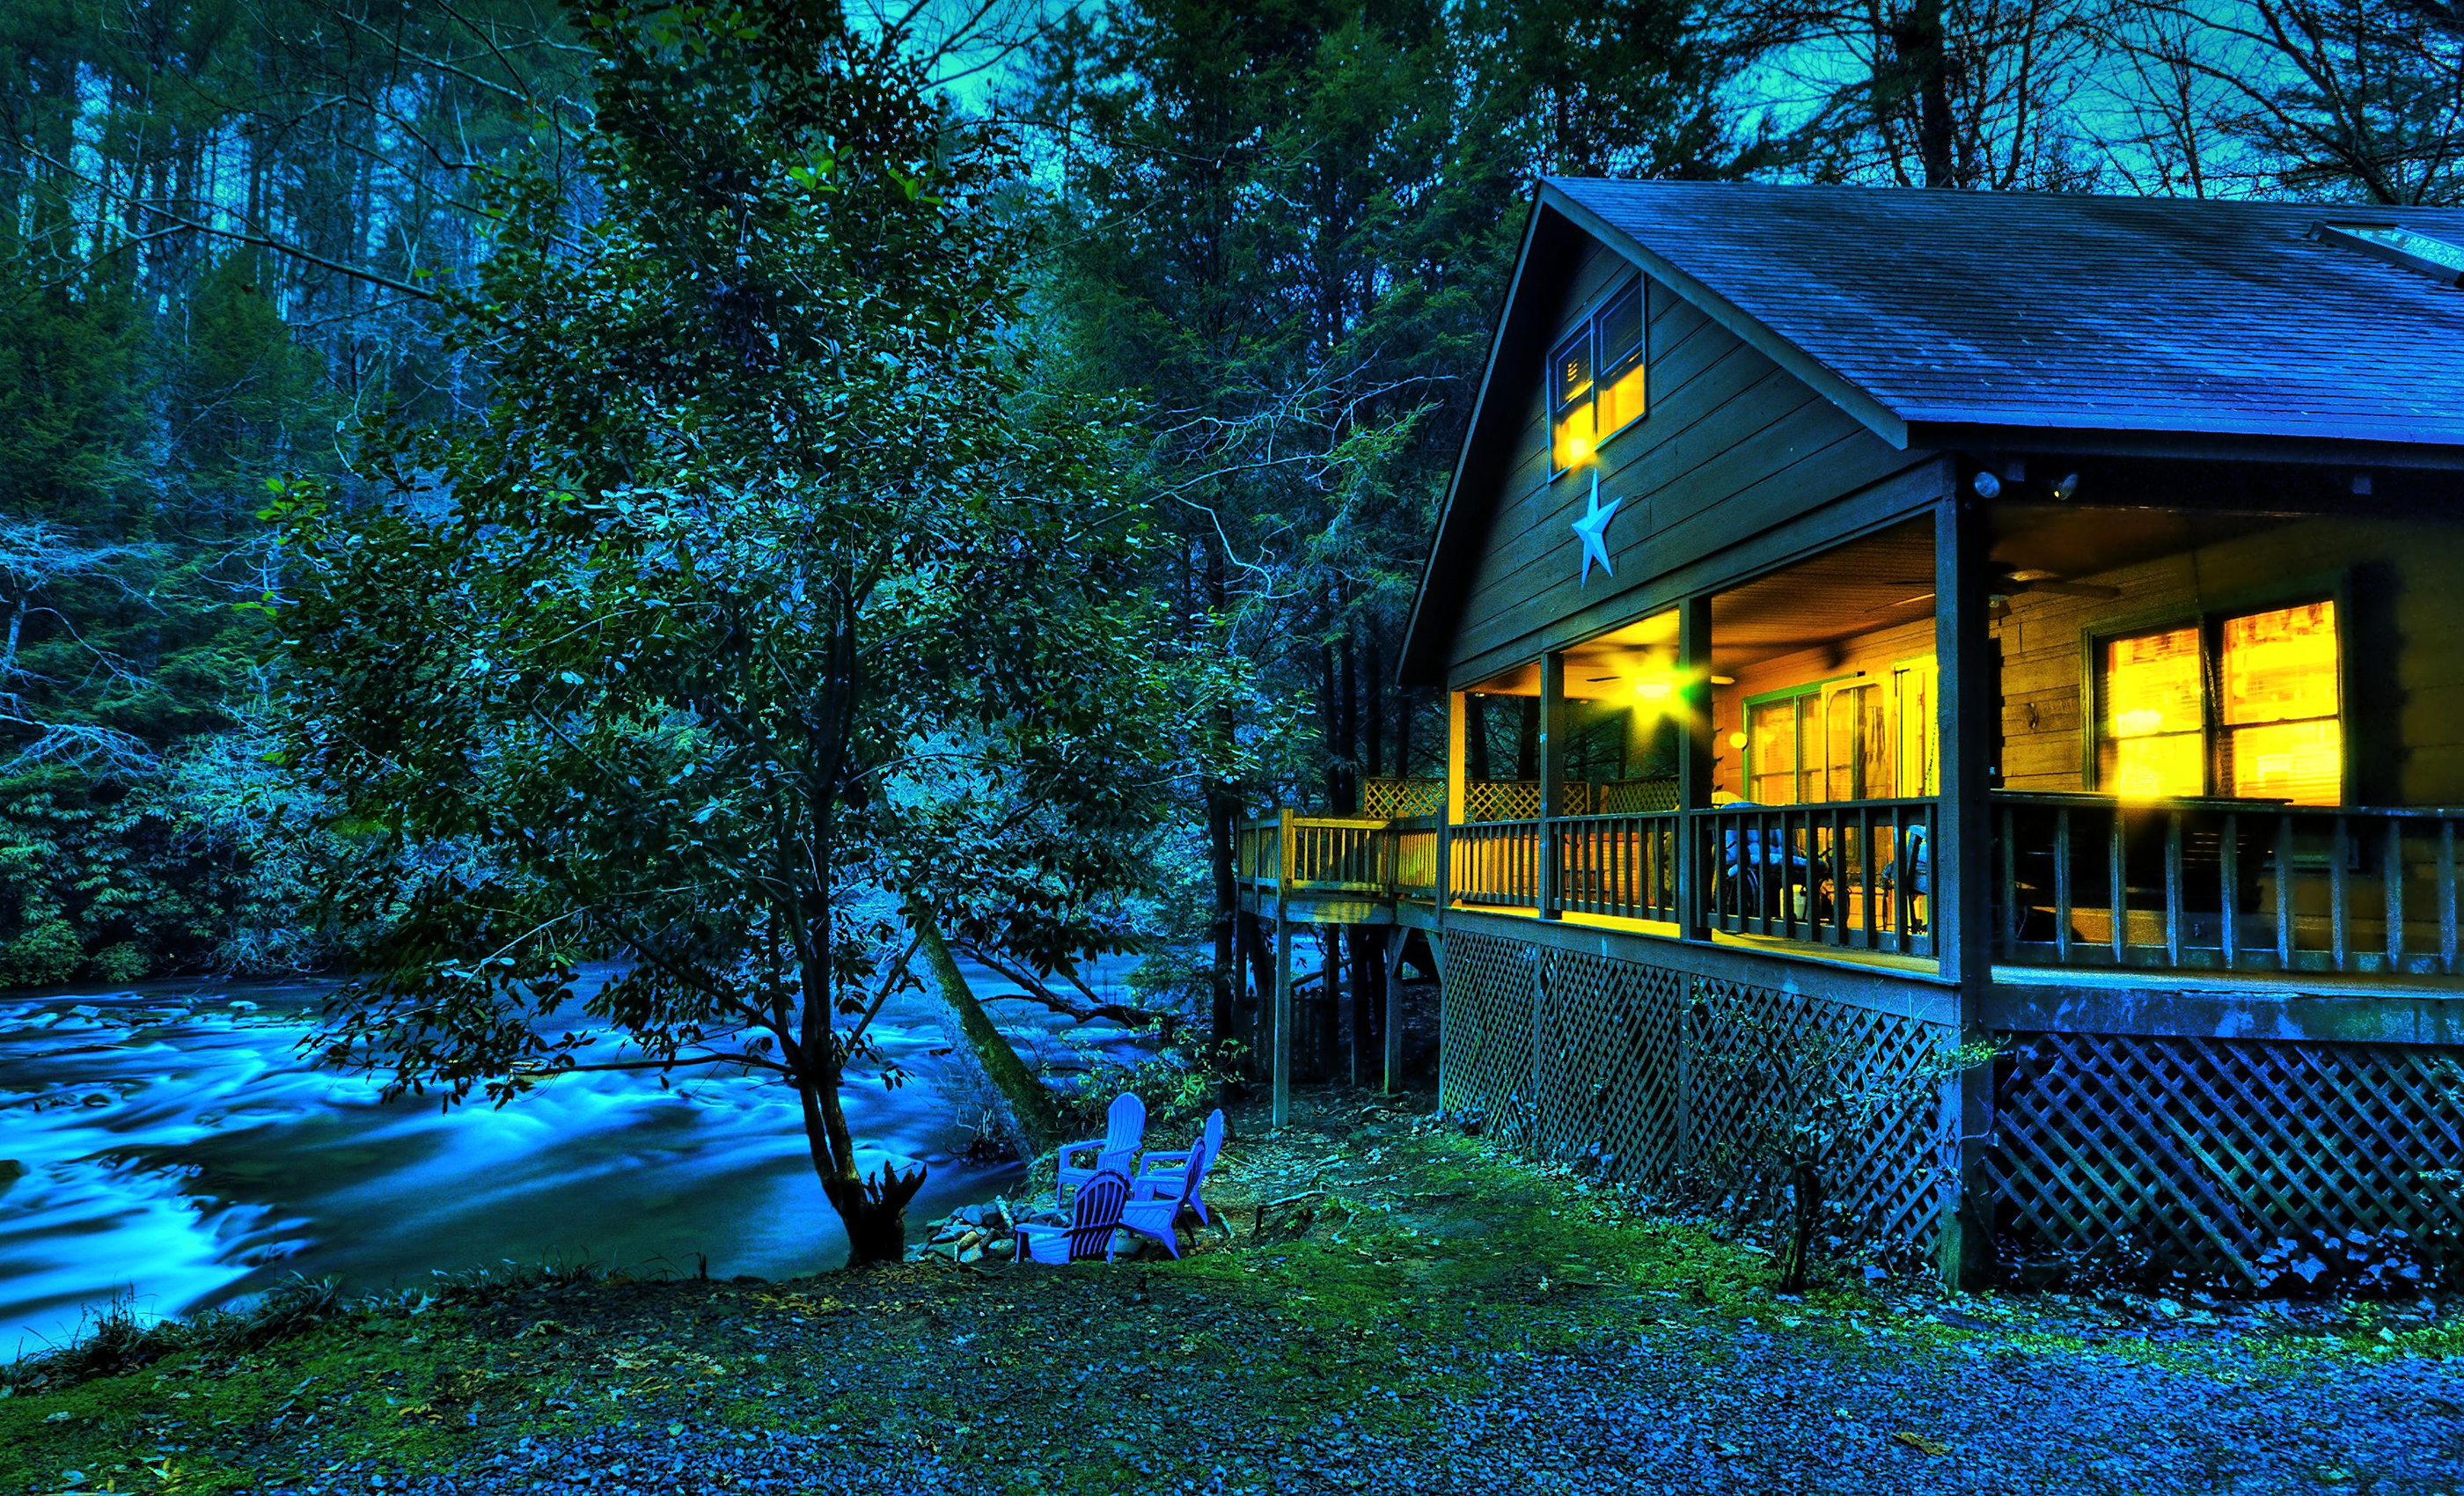 hdr, man made, house, dusk, light, porch, river, tree